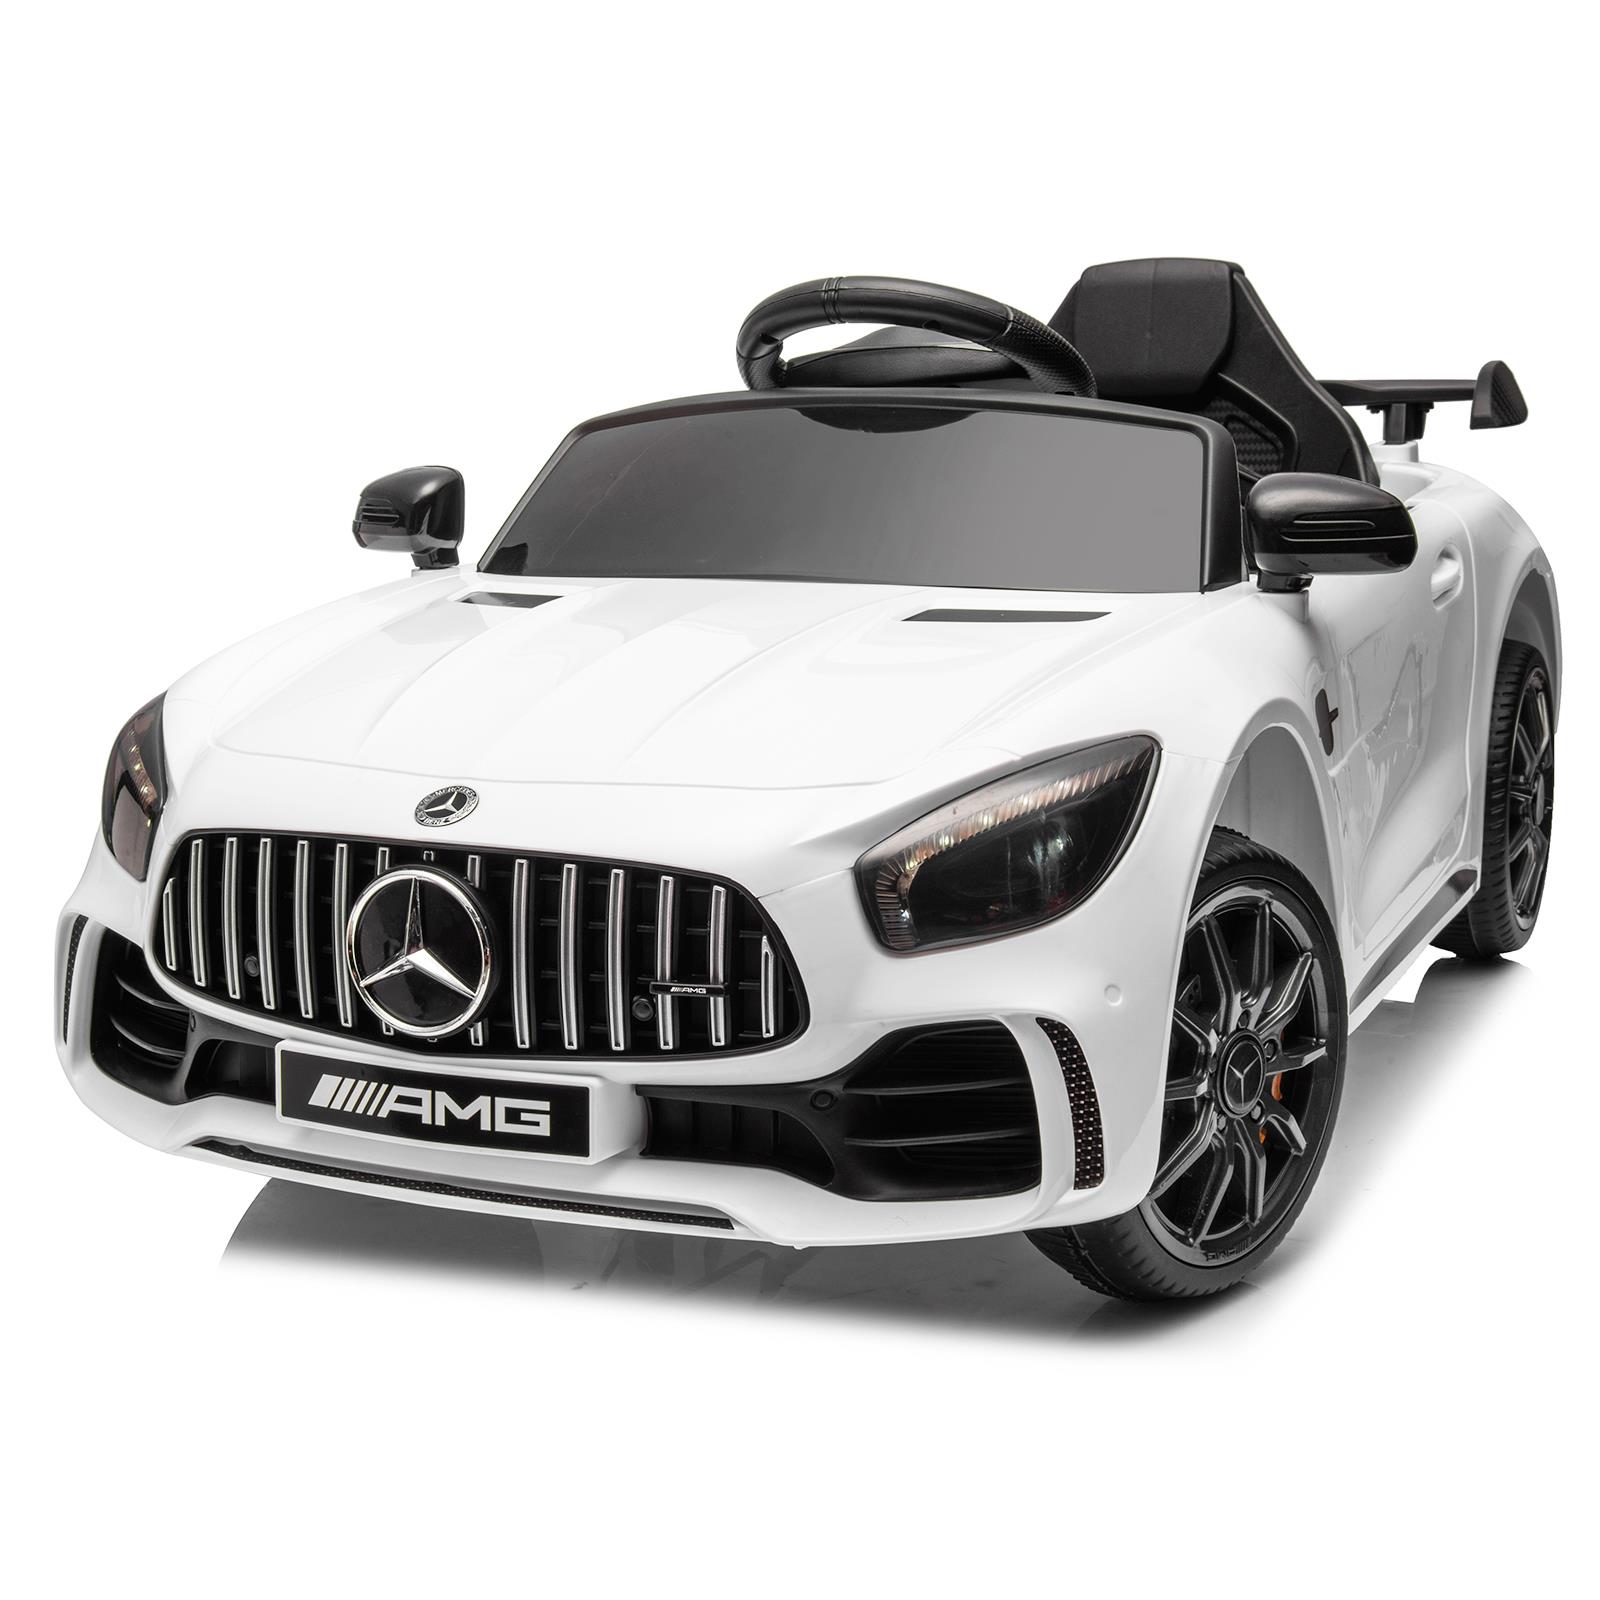 UBesGoo 12V Licensed Mercedes-Benz Electric Ride on Car Toy for Toddler Kid w/ Remote Control, LED Lights, White - image 1 of 9